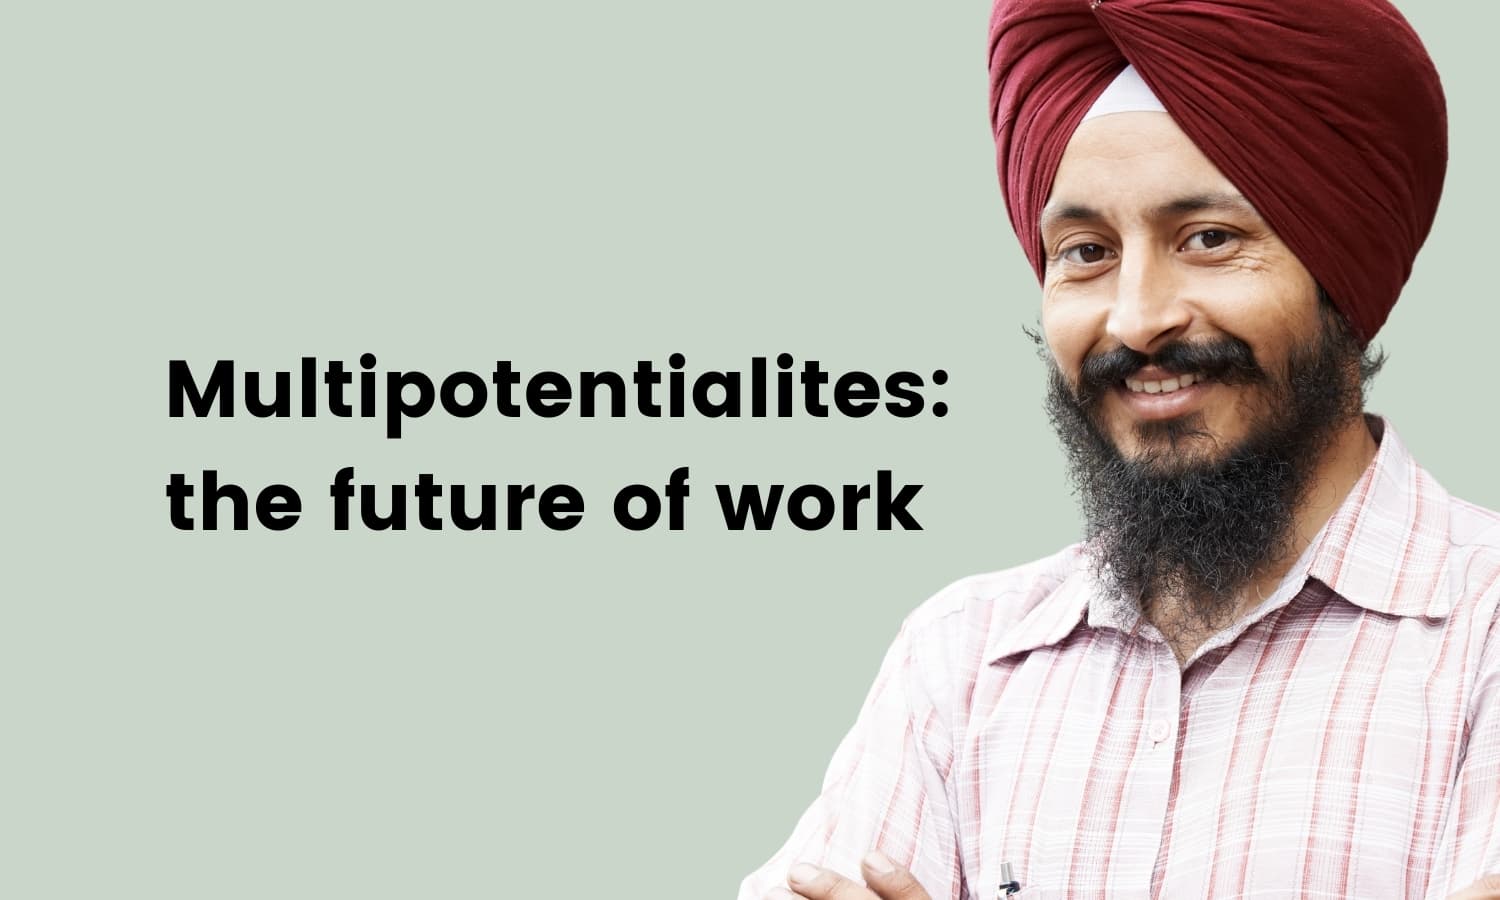 Multipotentialites: The future of work